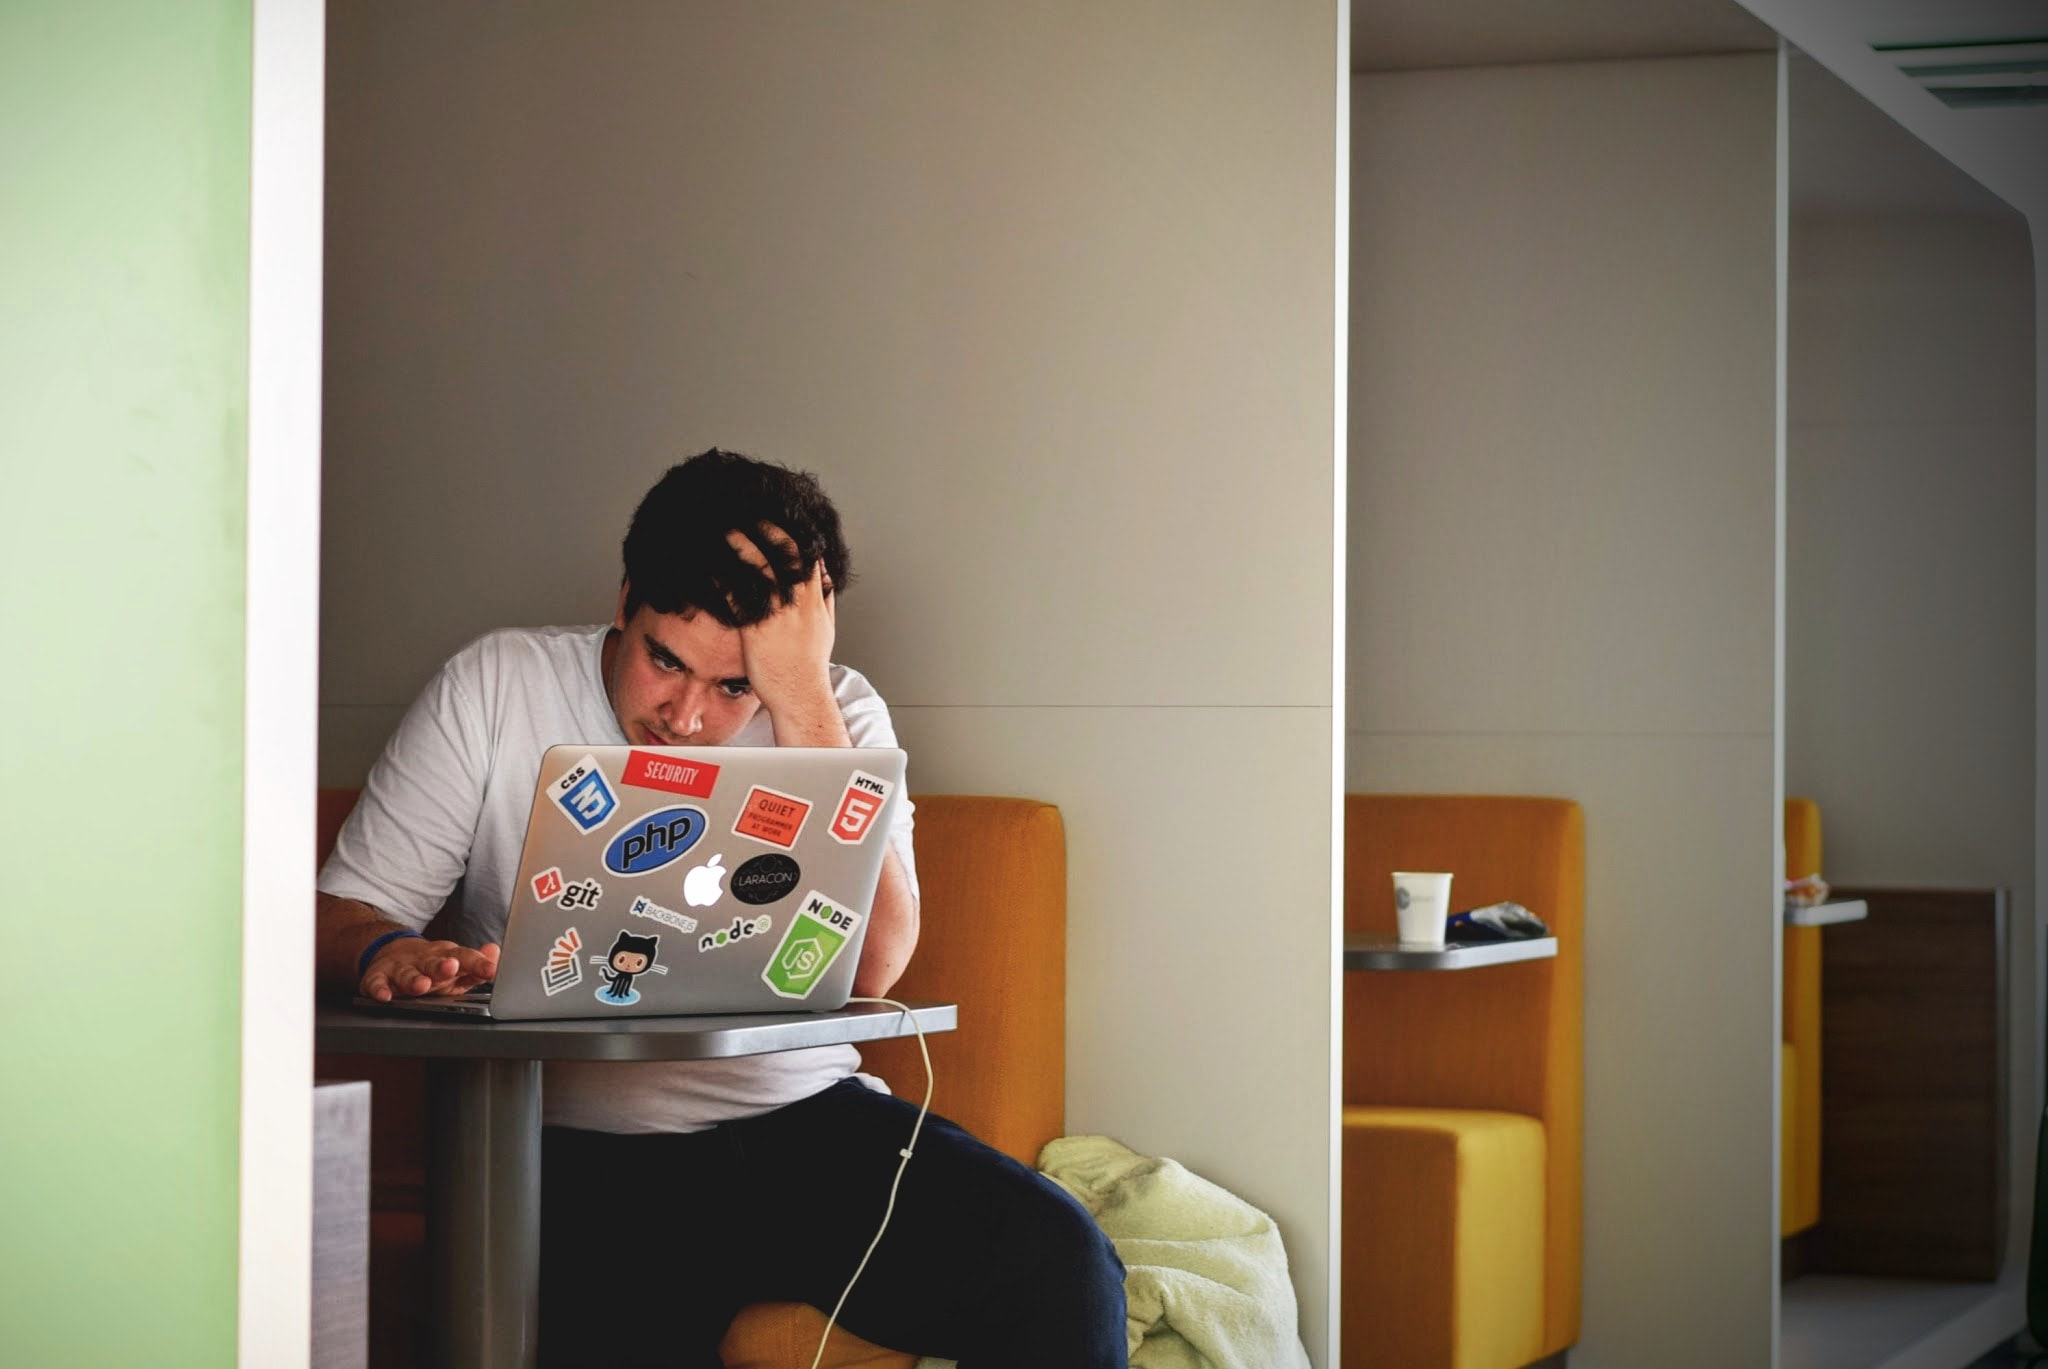 A Stressed man looking at a computer